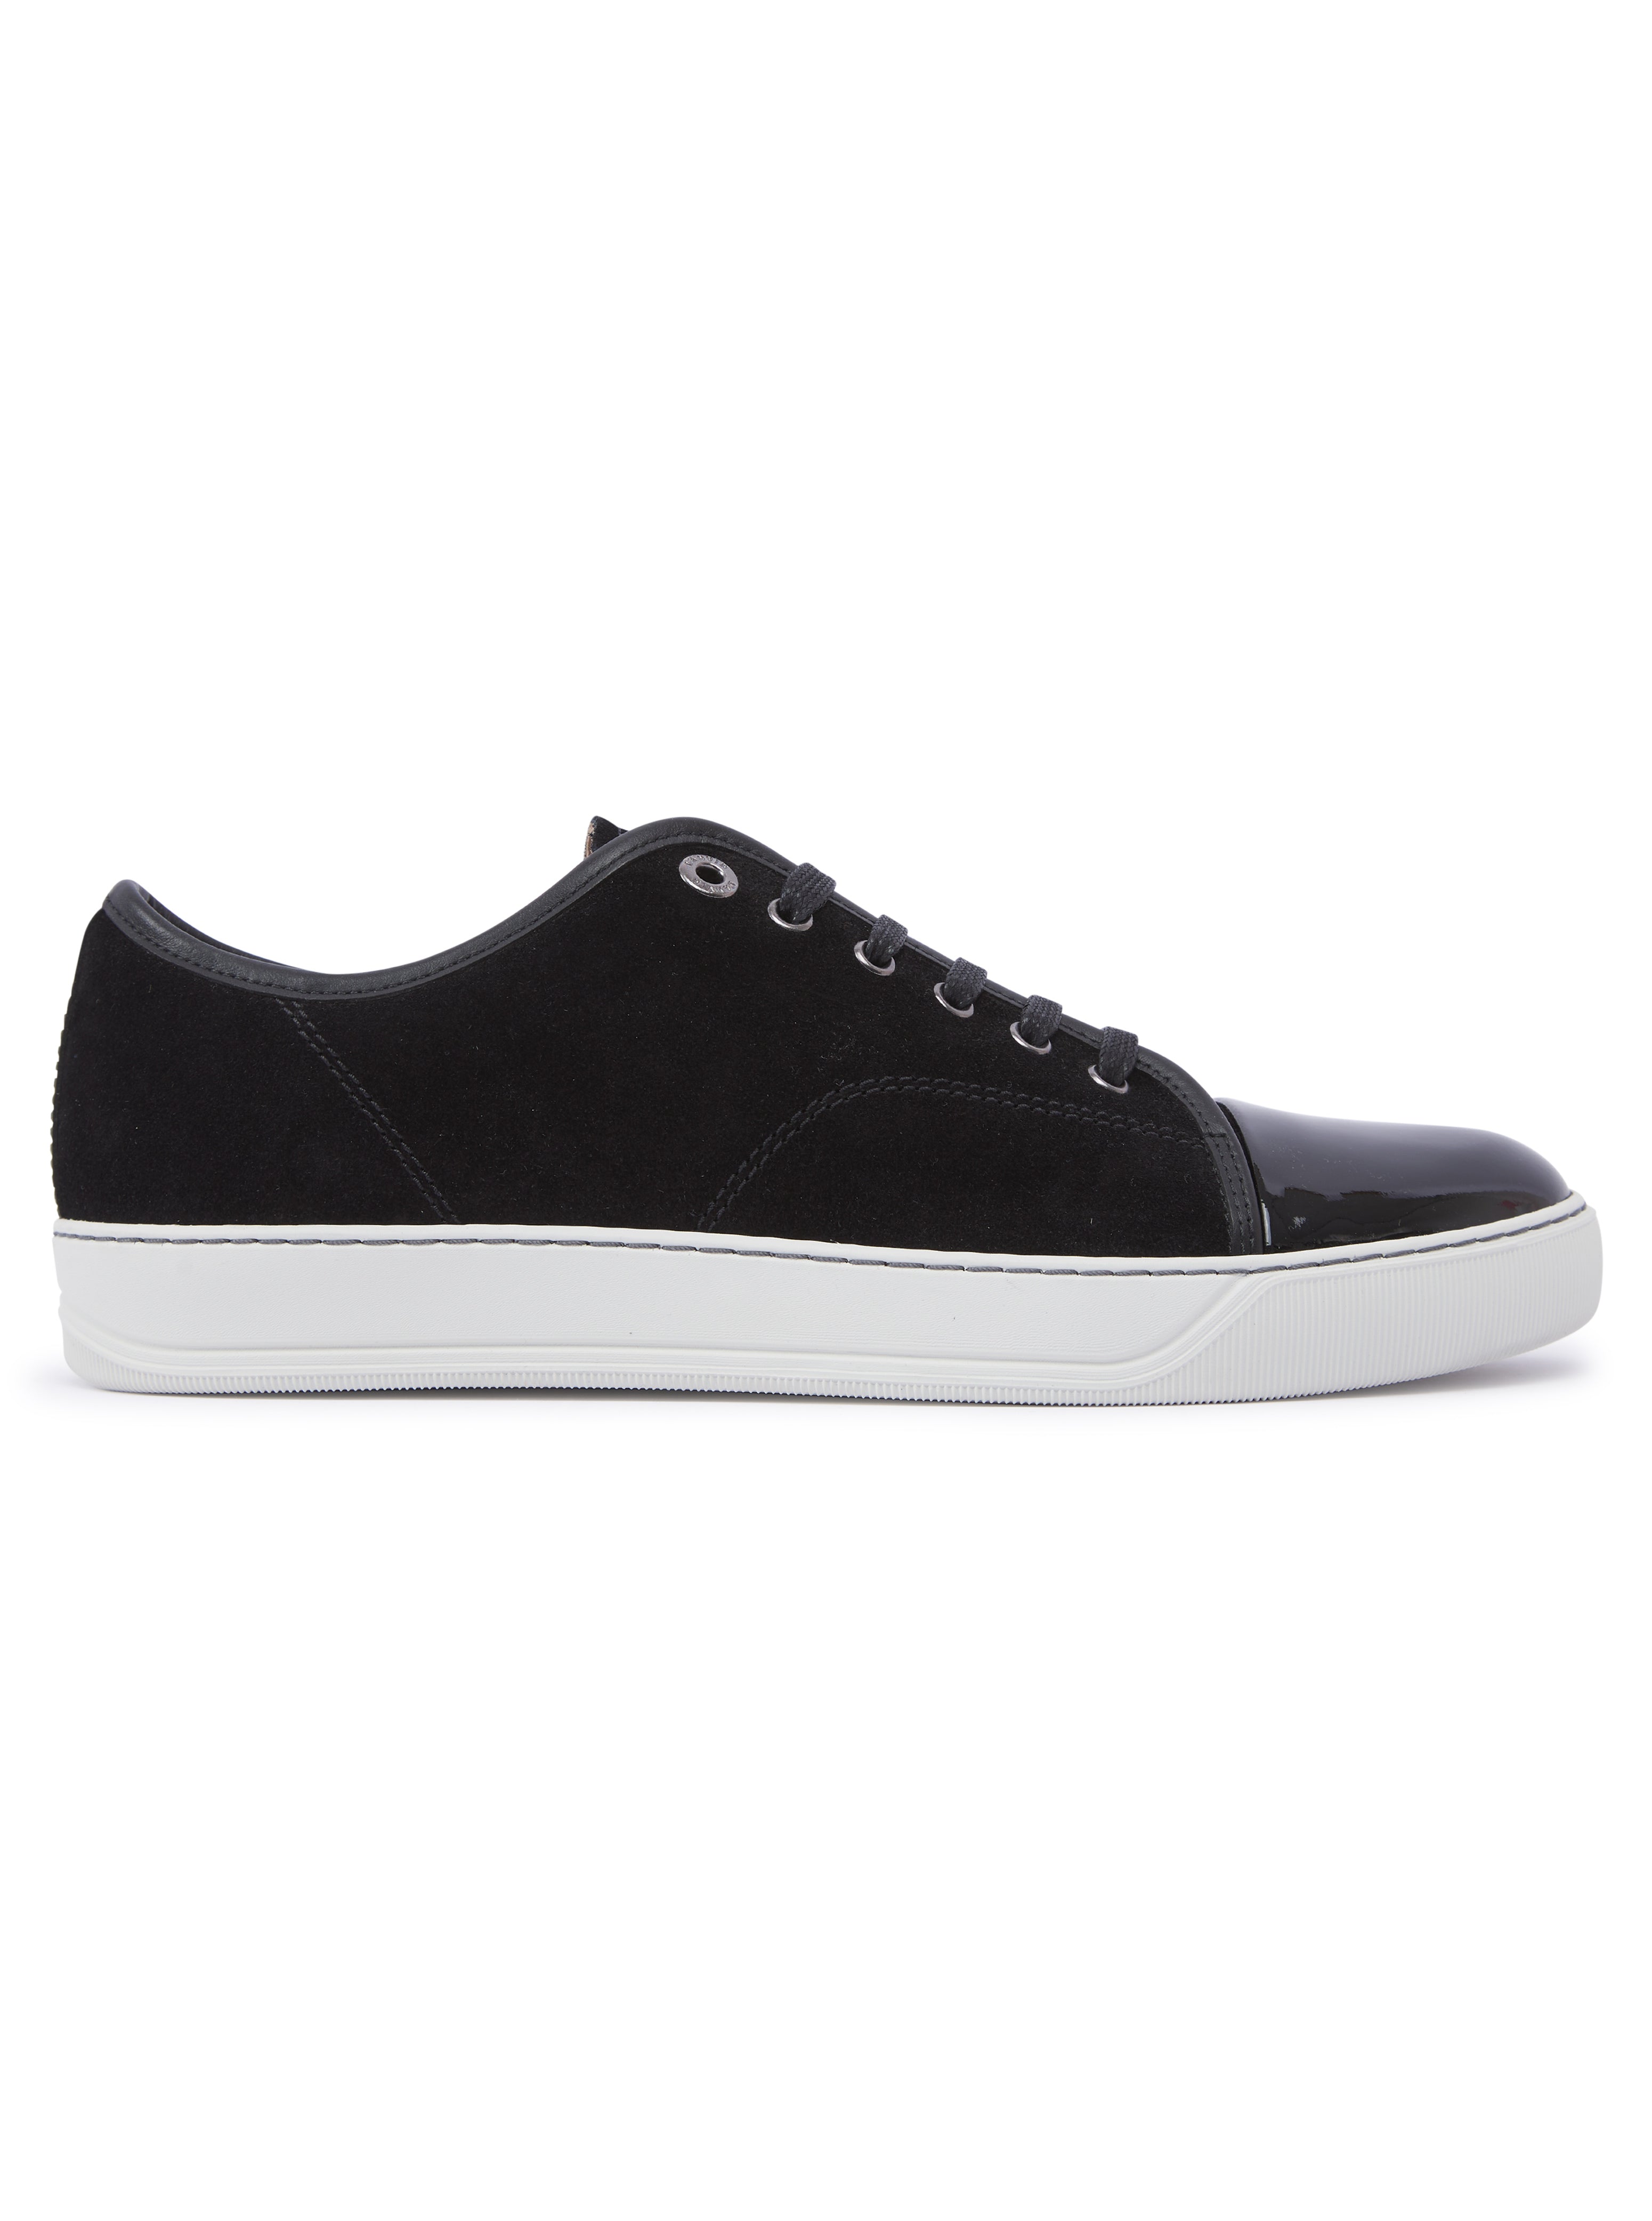 Load image into Gallery viewer, Lanvin Patent Toe Cap Black
